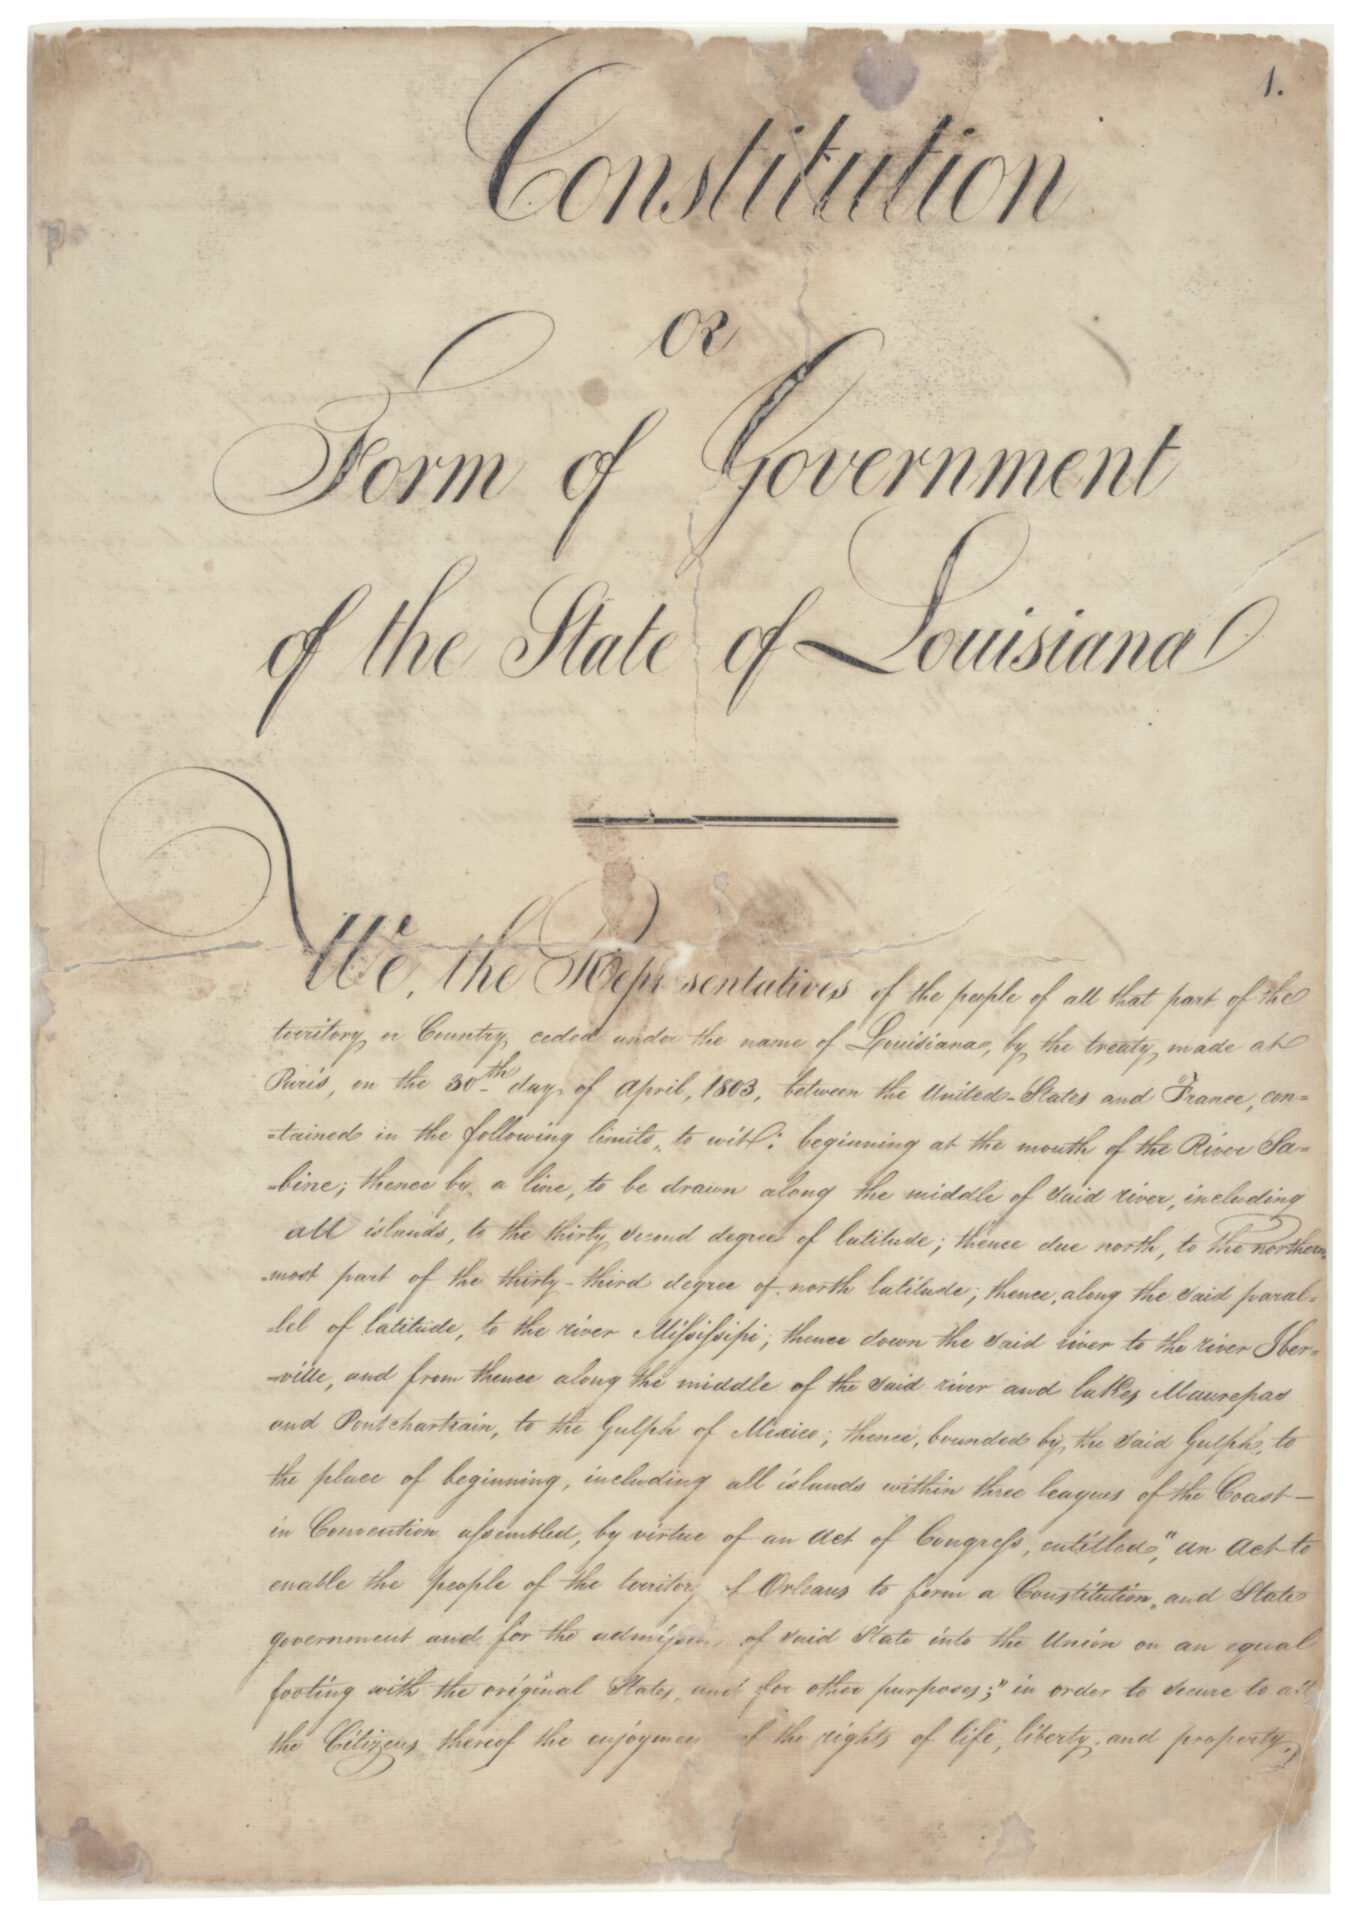 The Constitution of the State of Louisiana, January 22, 1812